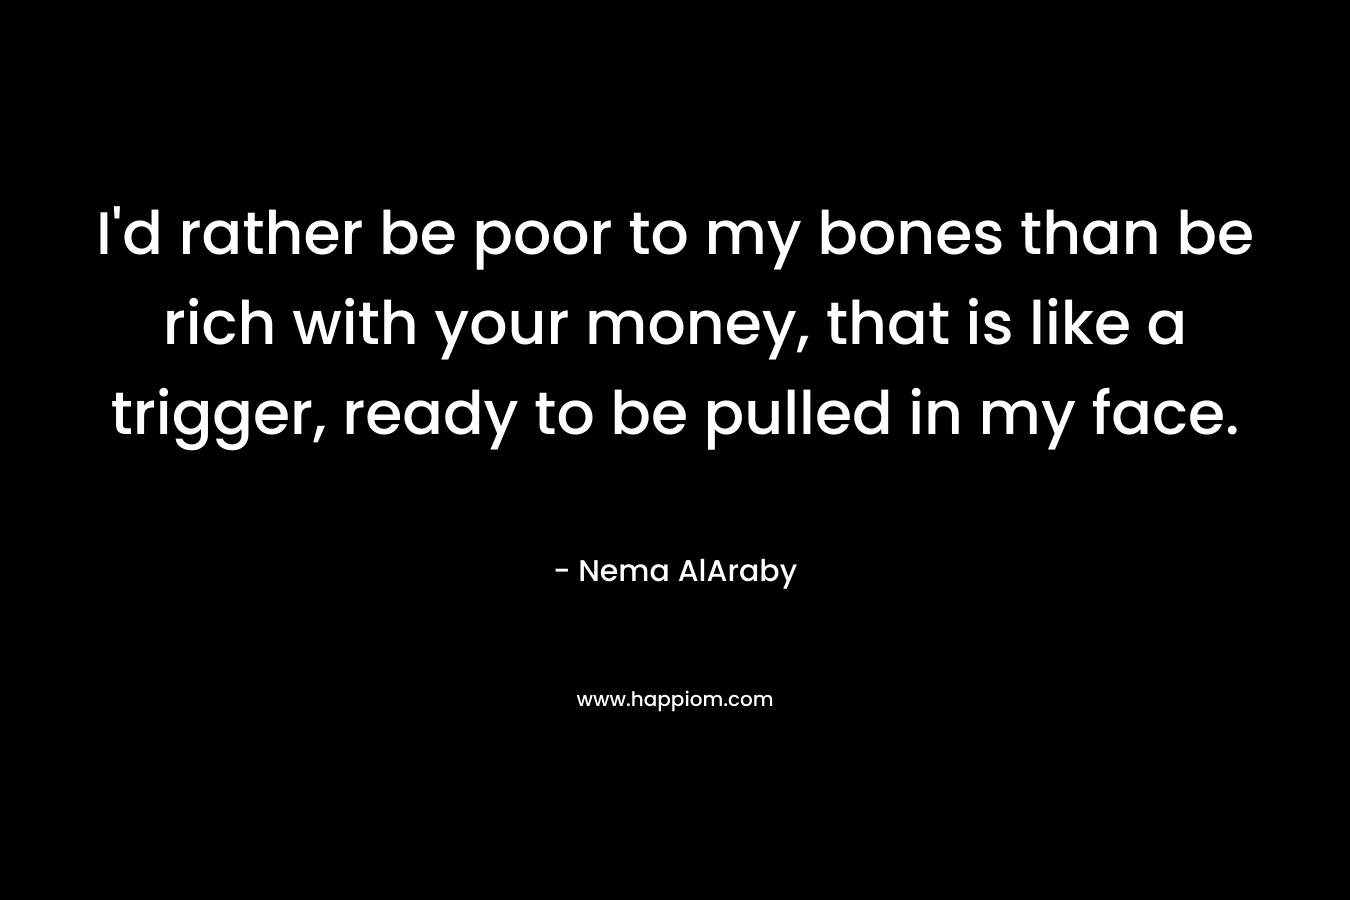 I'd rather be poor to my bones than be rich with your money, that is like a trigger, ready to be pulled in my face.